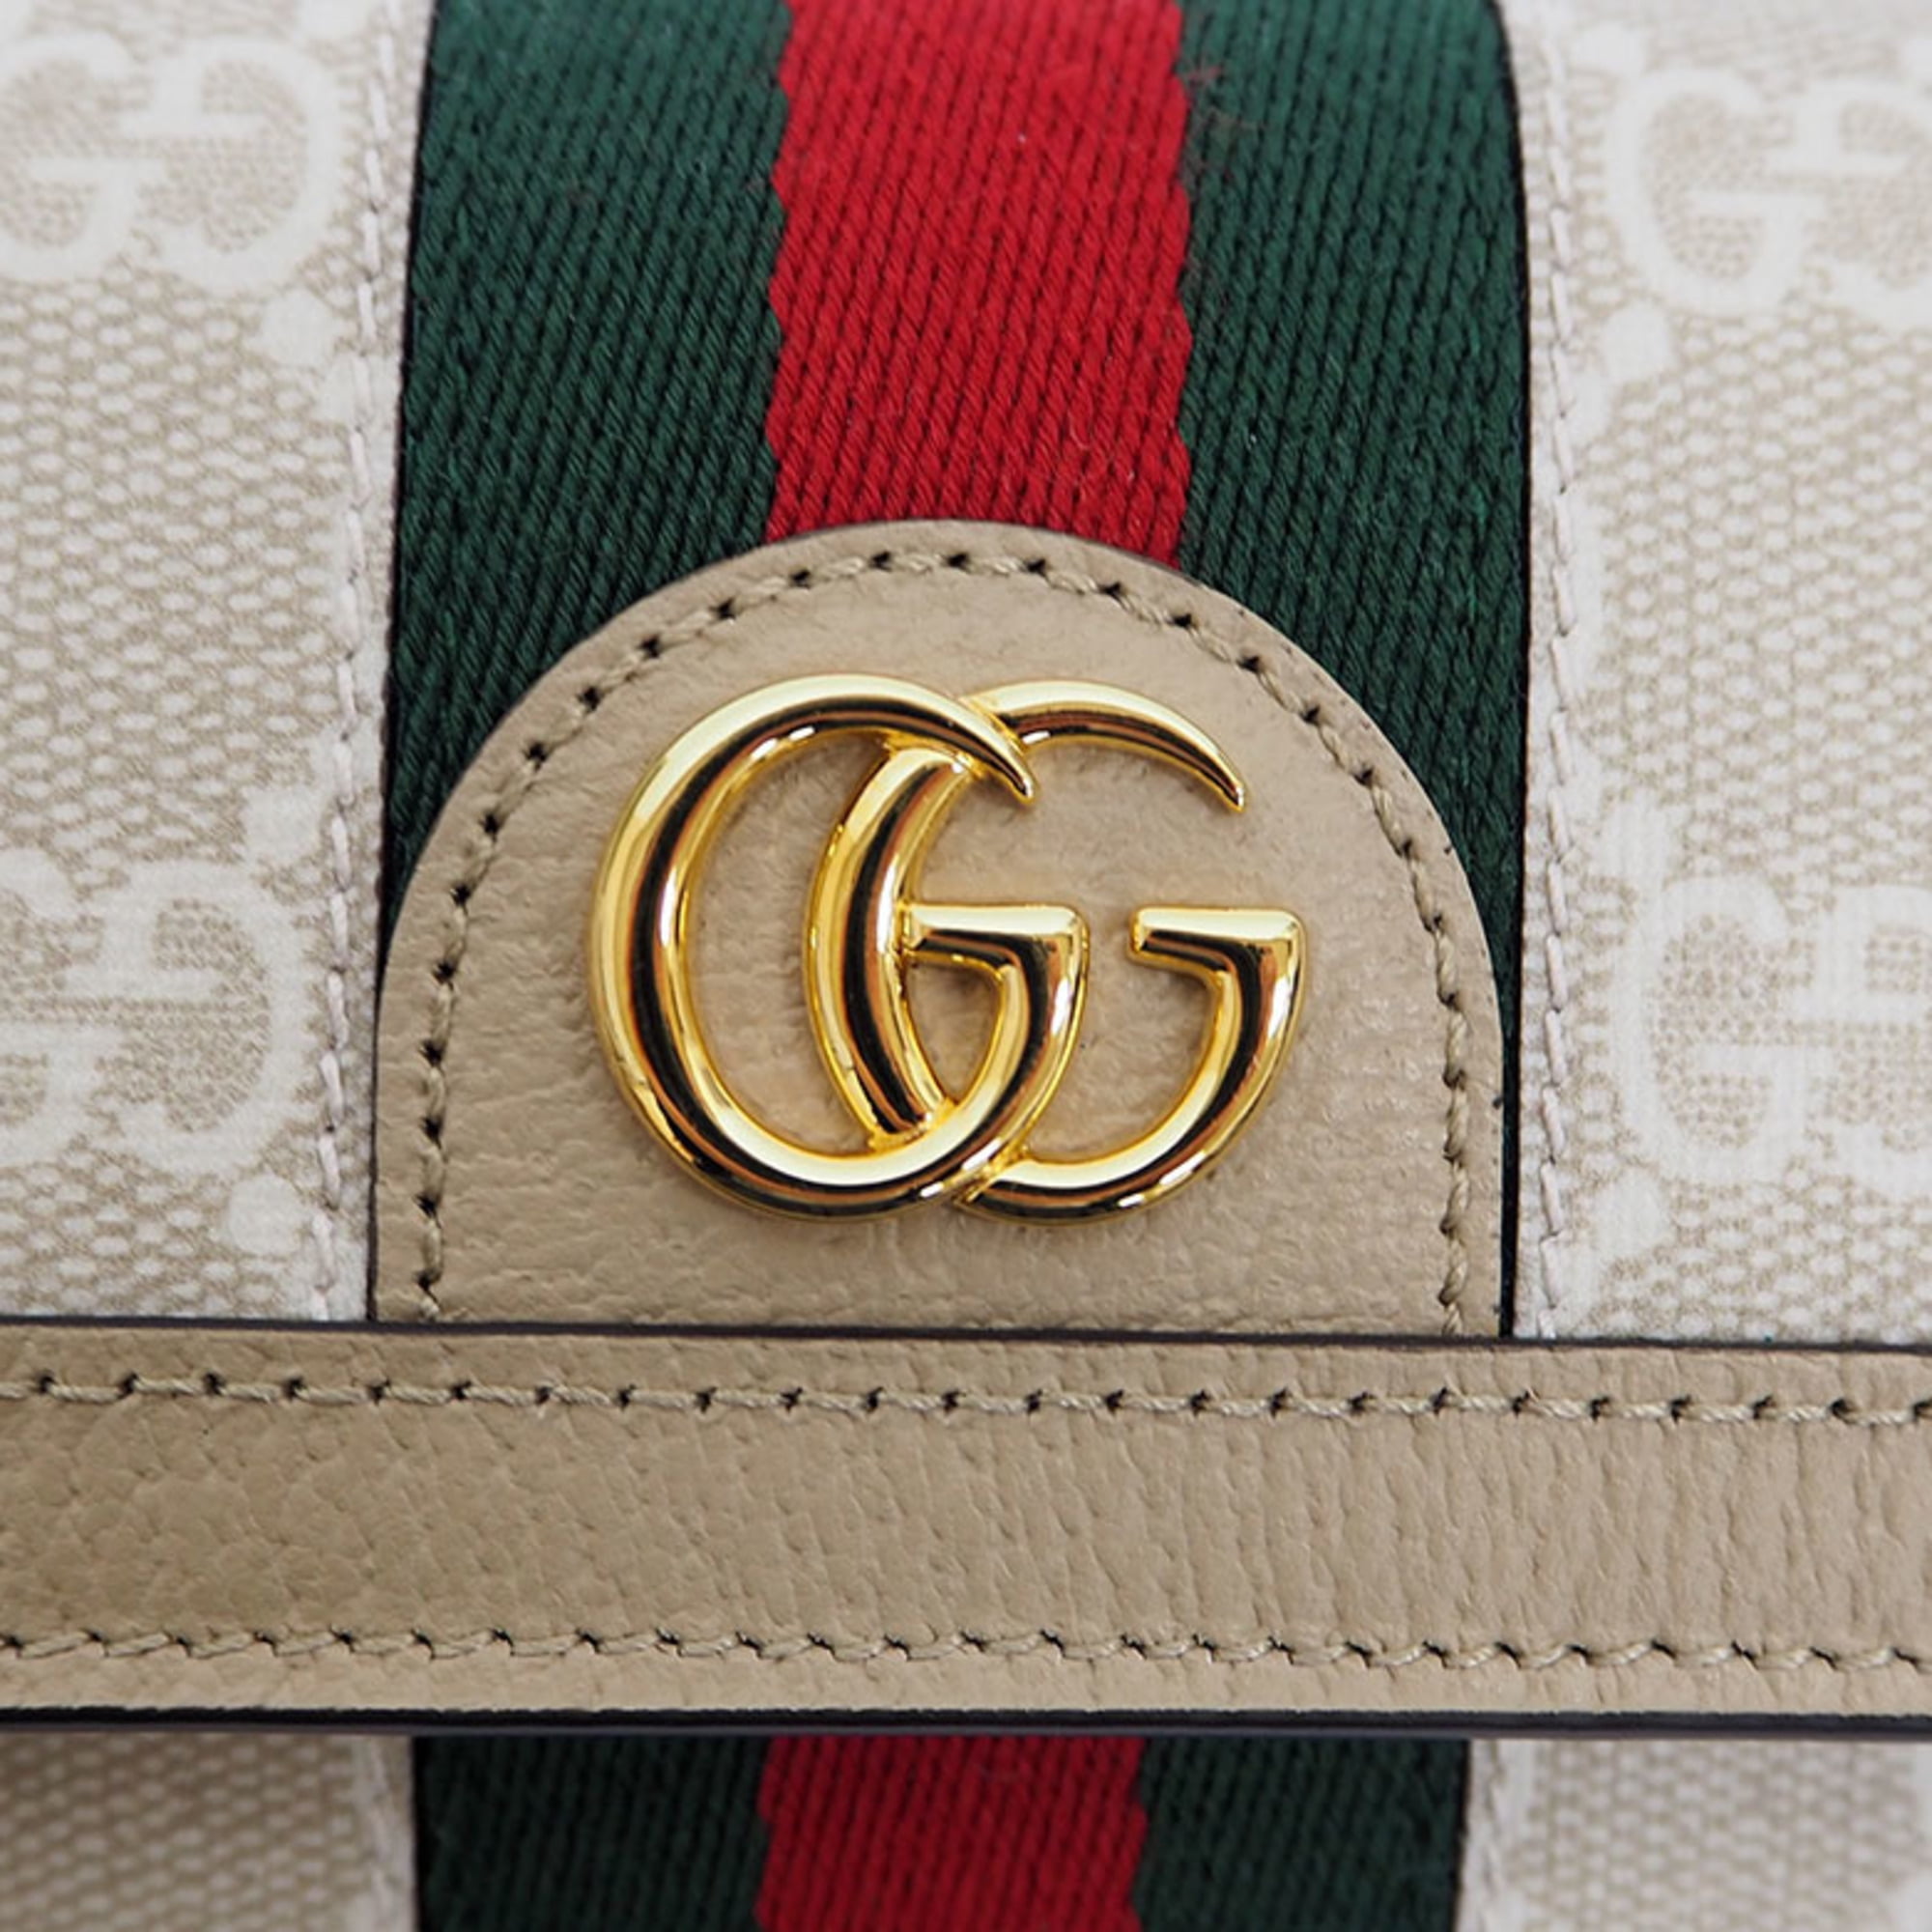 Gucci GG Snakeskin Trifold Wallet - Black Leather